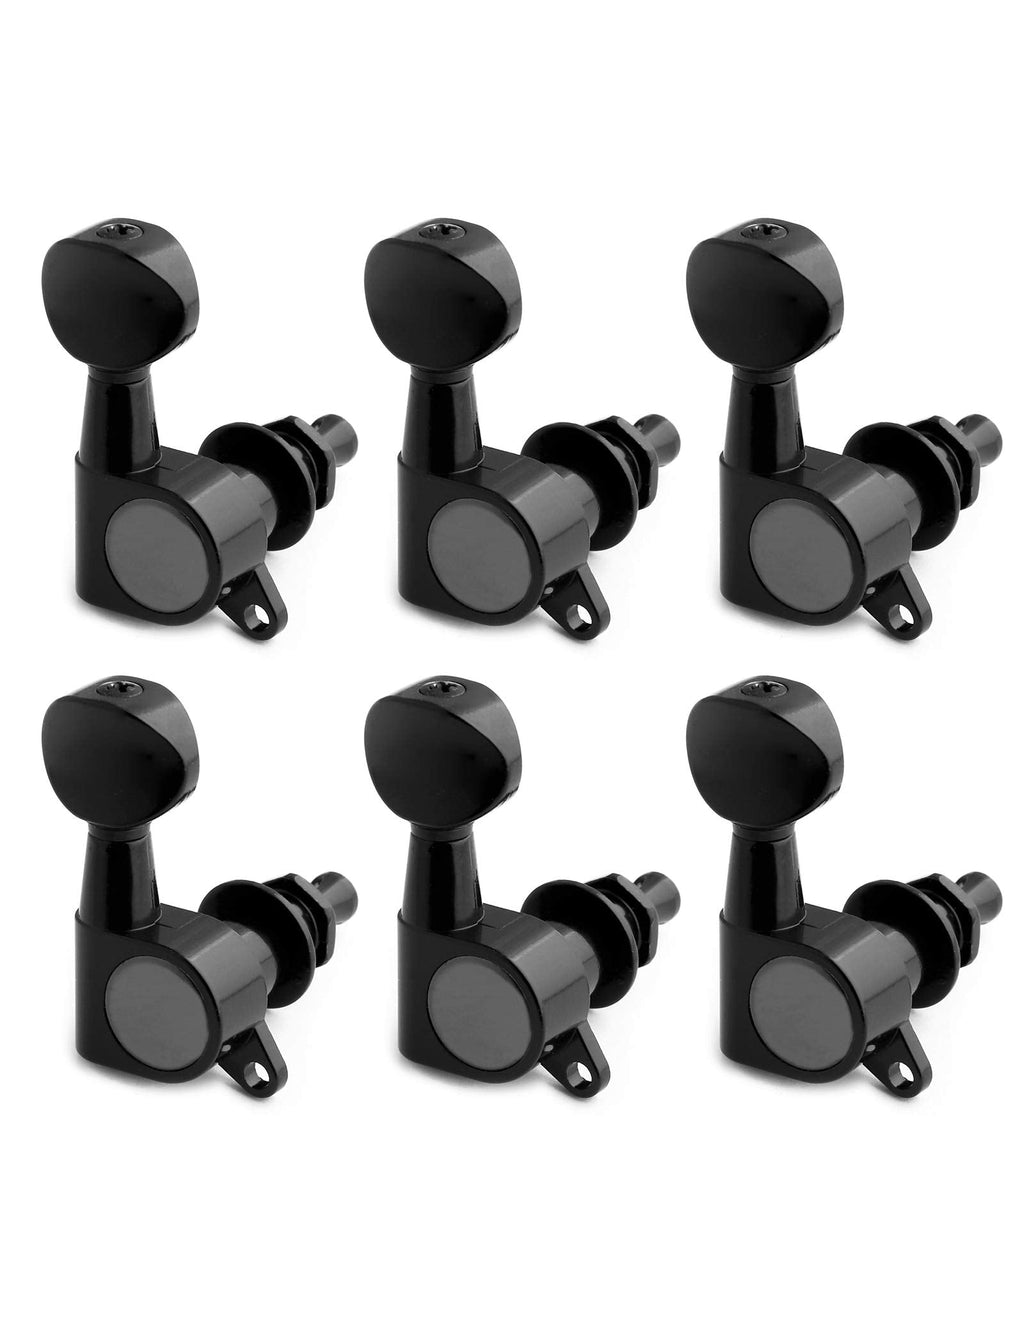 Holmer Guitar String Tuning Pegs Tuning Machines Sealed Machine Heads Grover Tuners Tuning Keys Oval Button 6 In Line for Right Handed Electric Guitar or Acoustic Guitar Black.